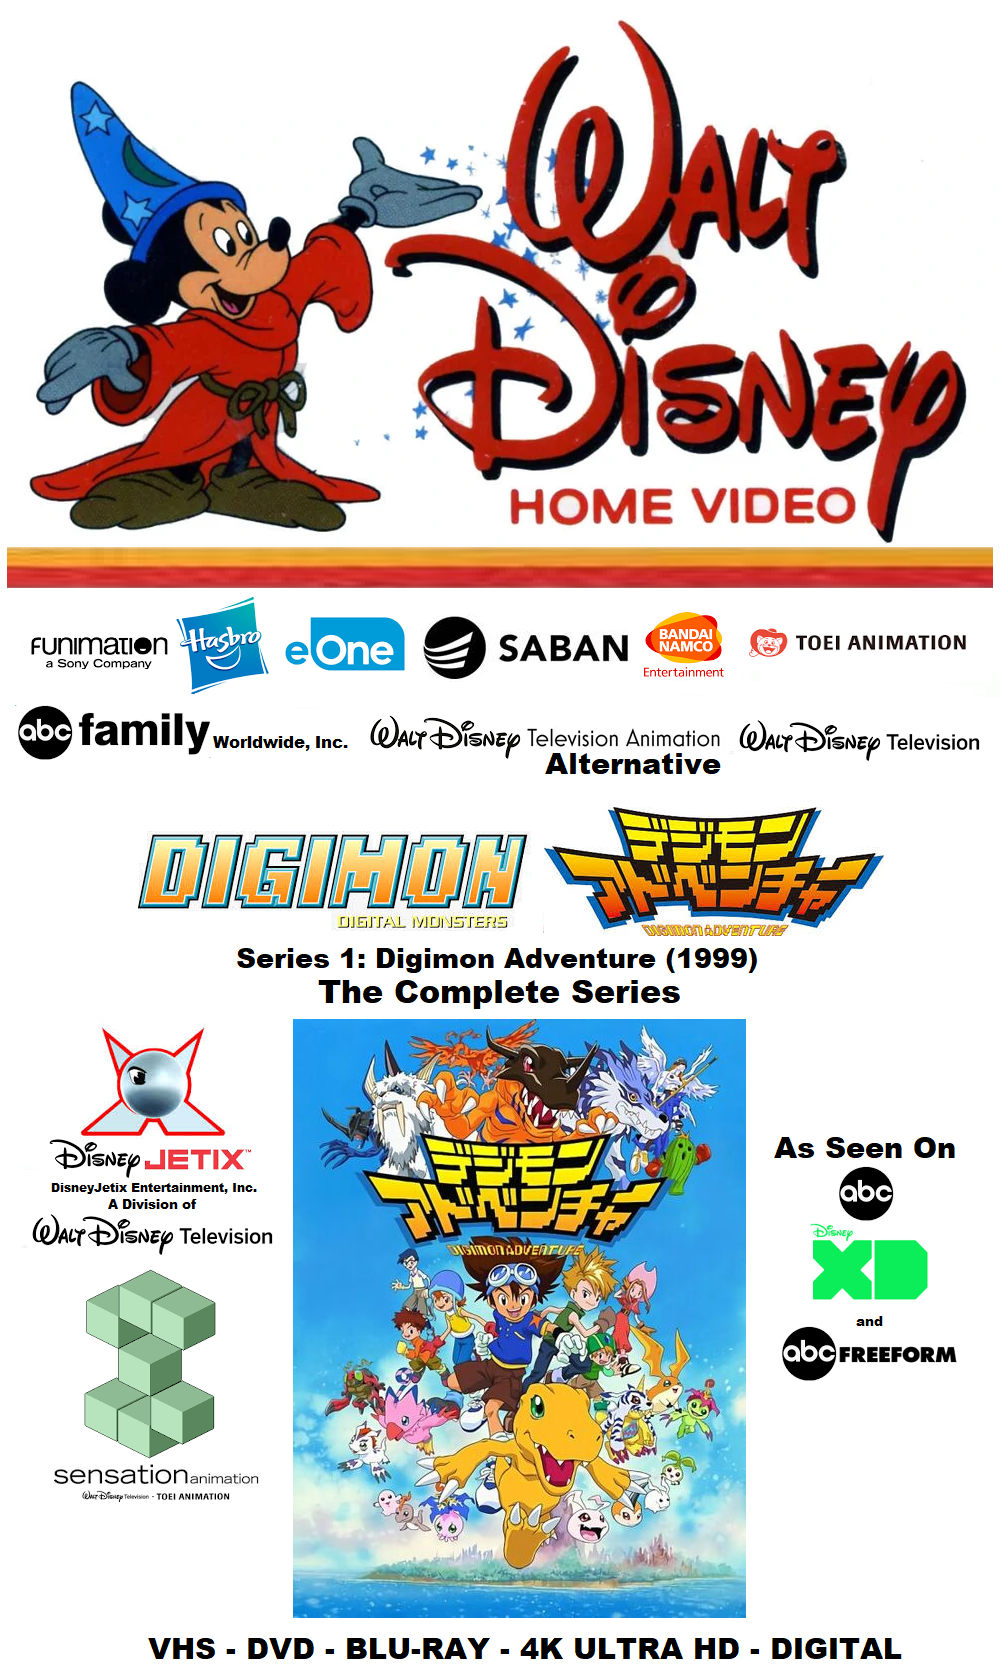 Digimon Adventure 01 Vhs Retro Box Cover By Airsharksquad On Deviantart